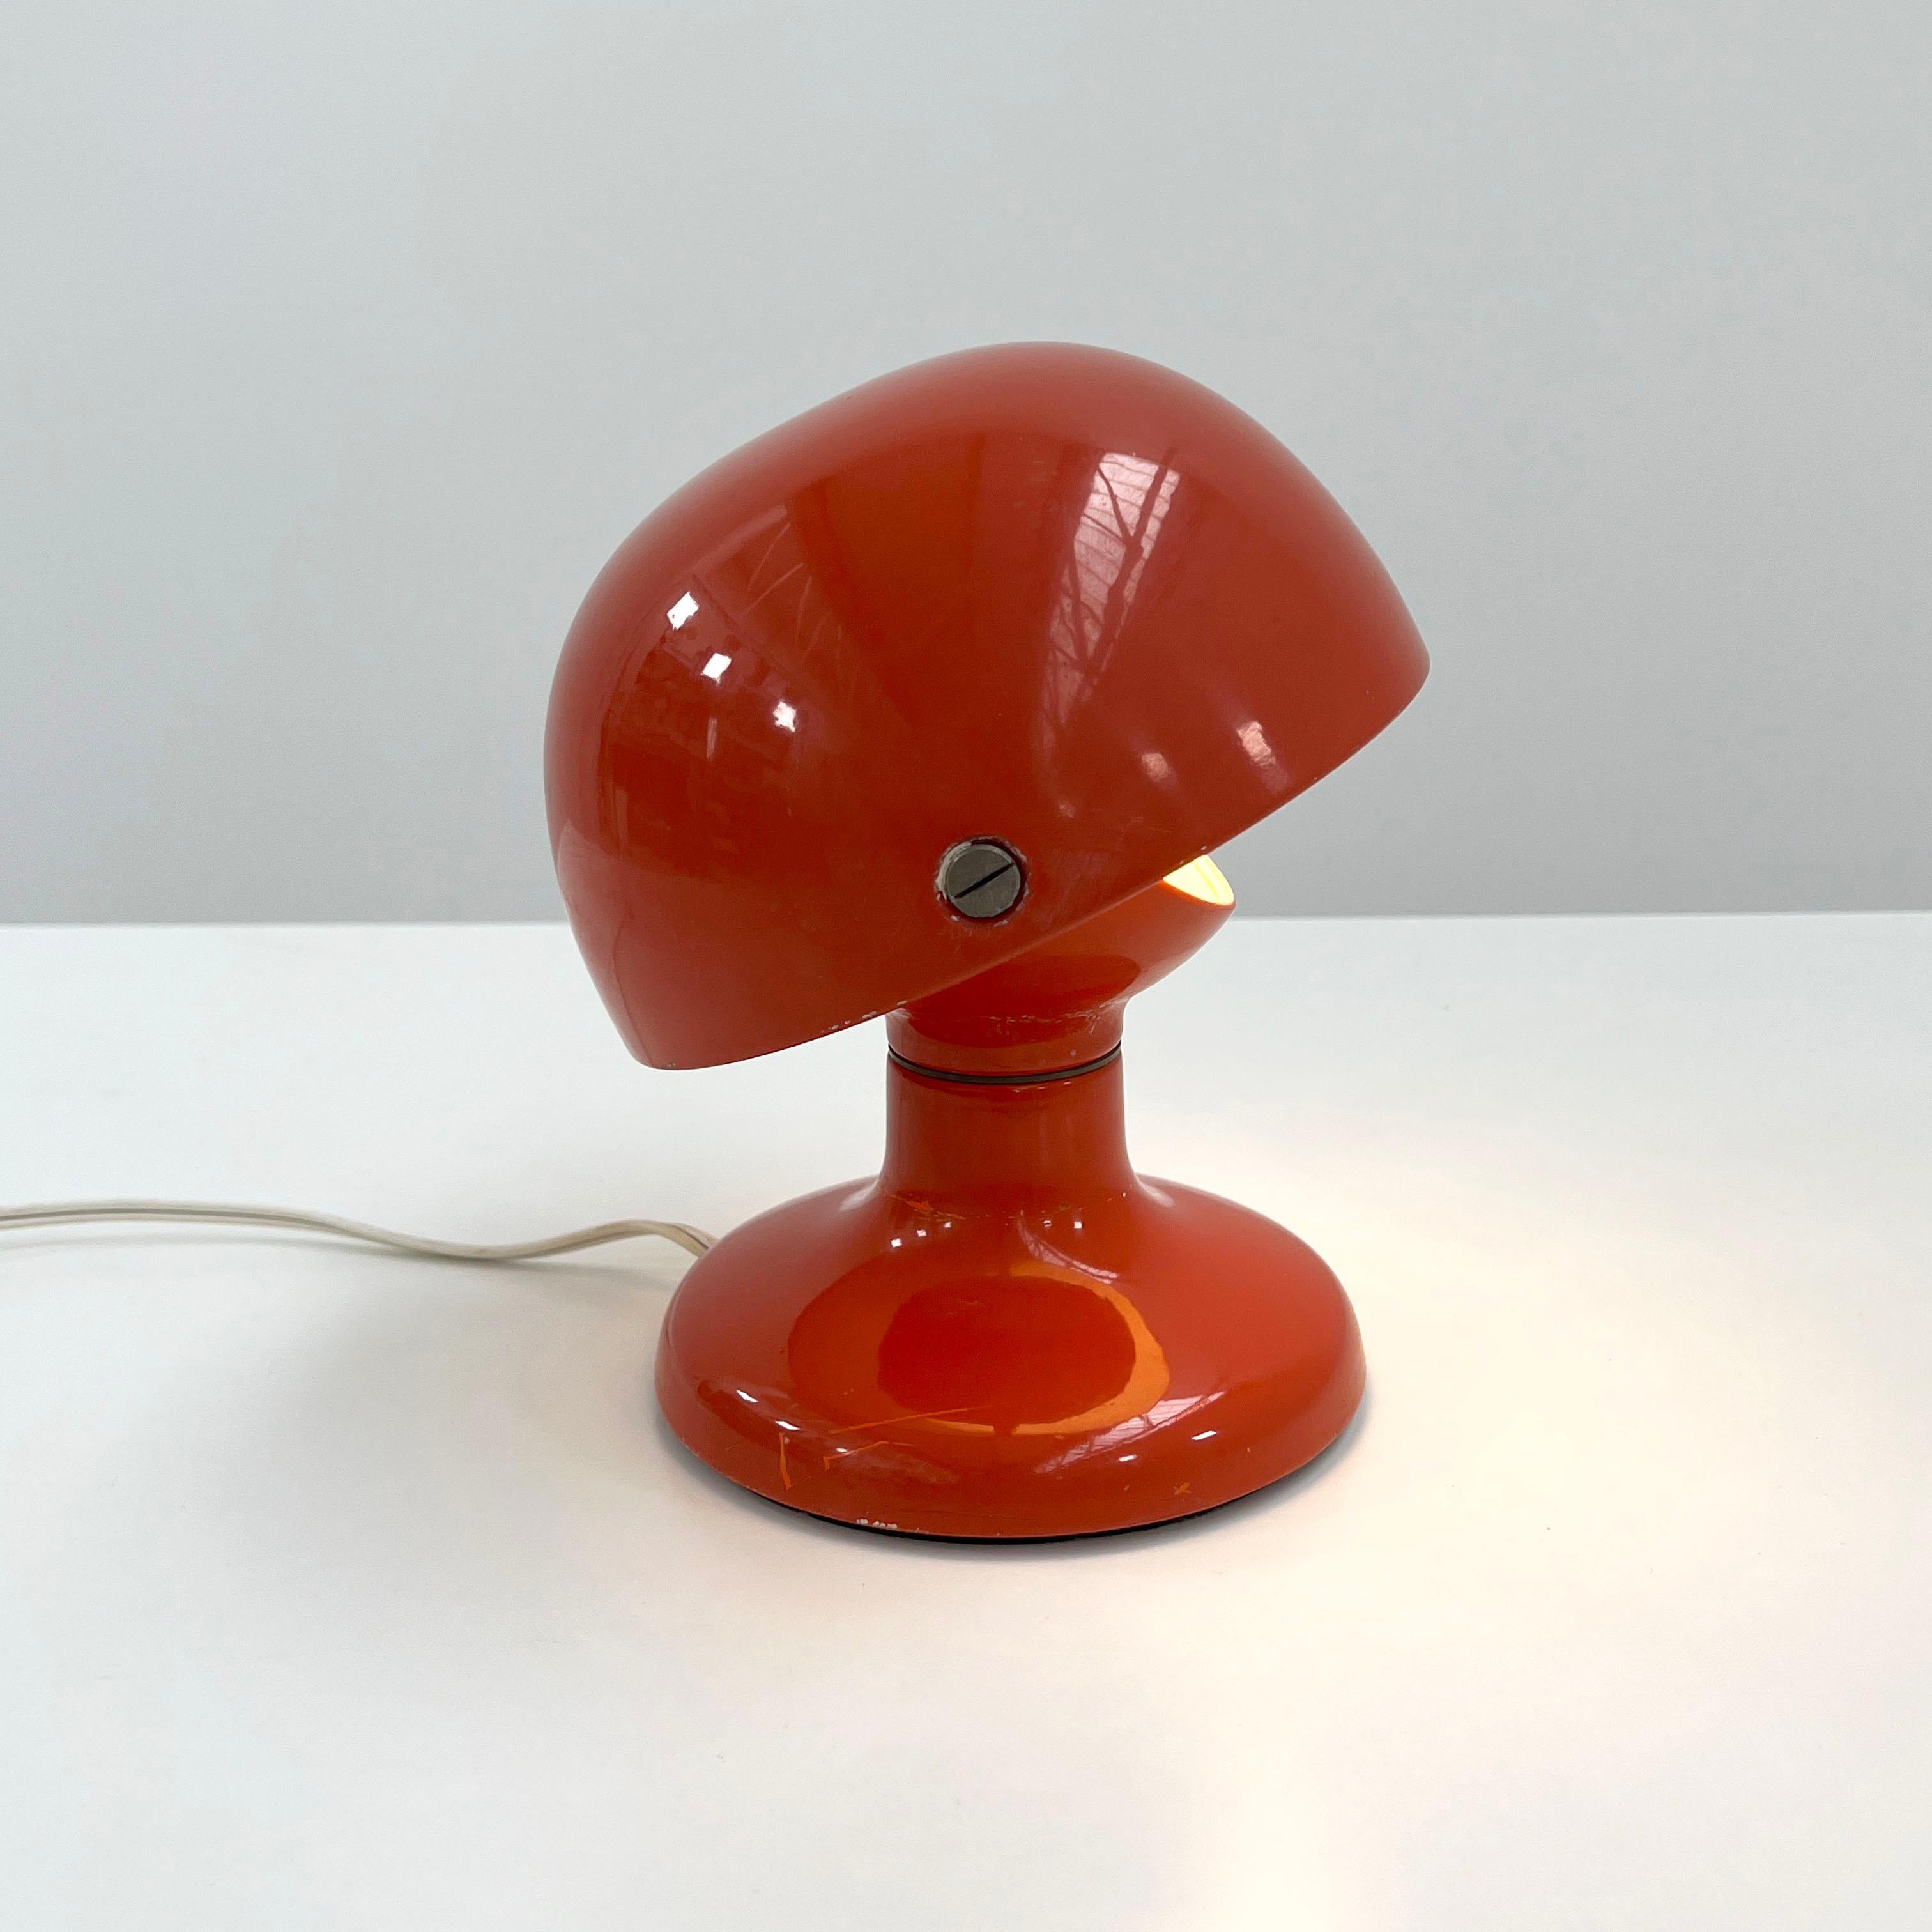 Designer - Tobia & Afra Scarpa
Producer - Flos
Model - Jucker 147 Table Lamp
Design Period - Sixties
Measurements - Width 18 cm x Depth 18 cm x Height 23 cm
Materials - Metal
Color - Coral
Light wear consistent with age and use. Some scuffs